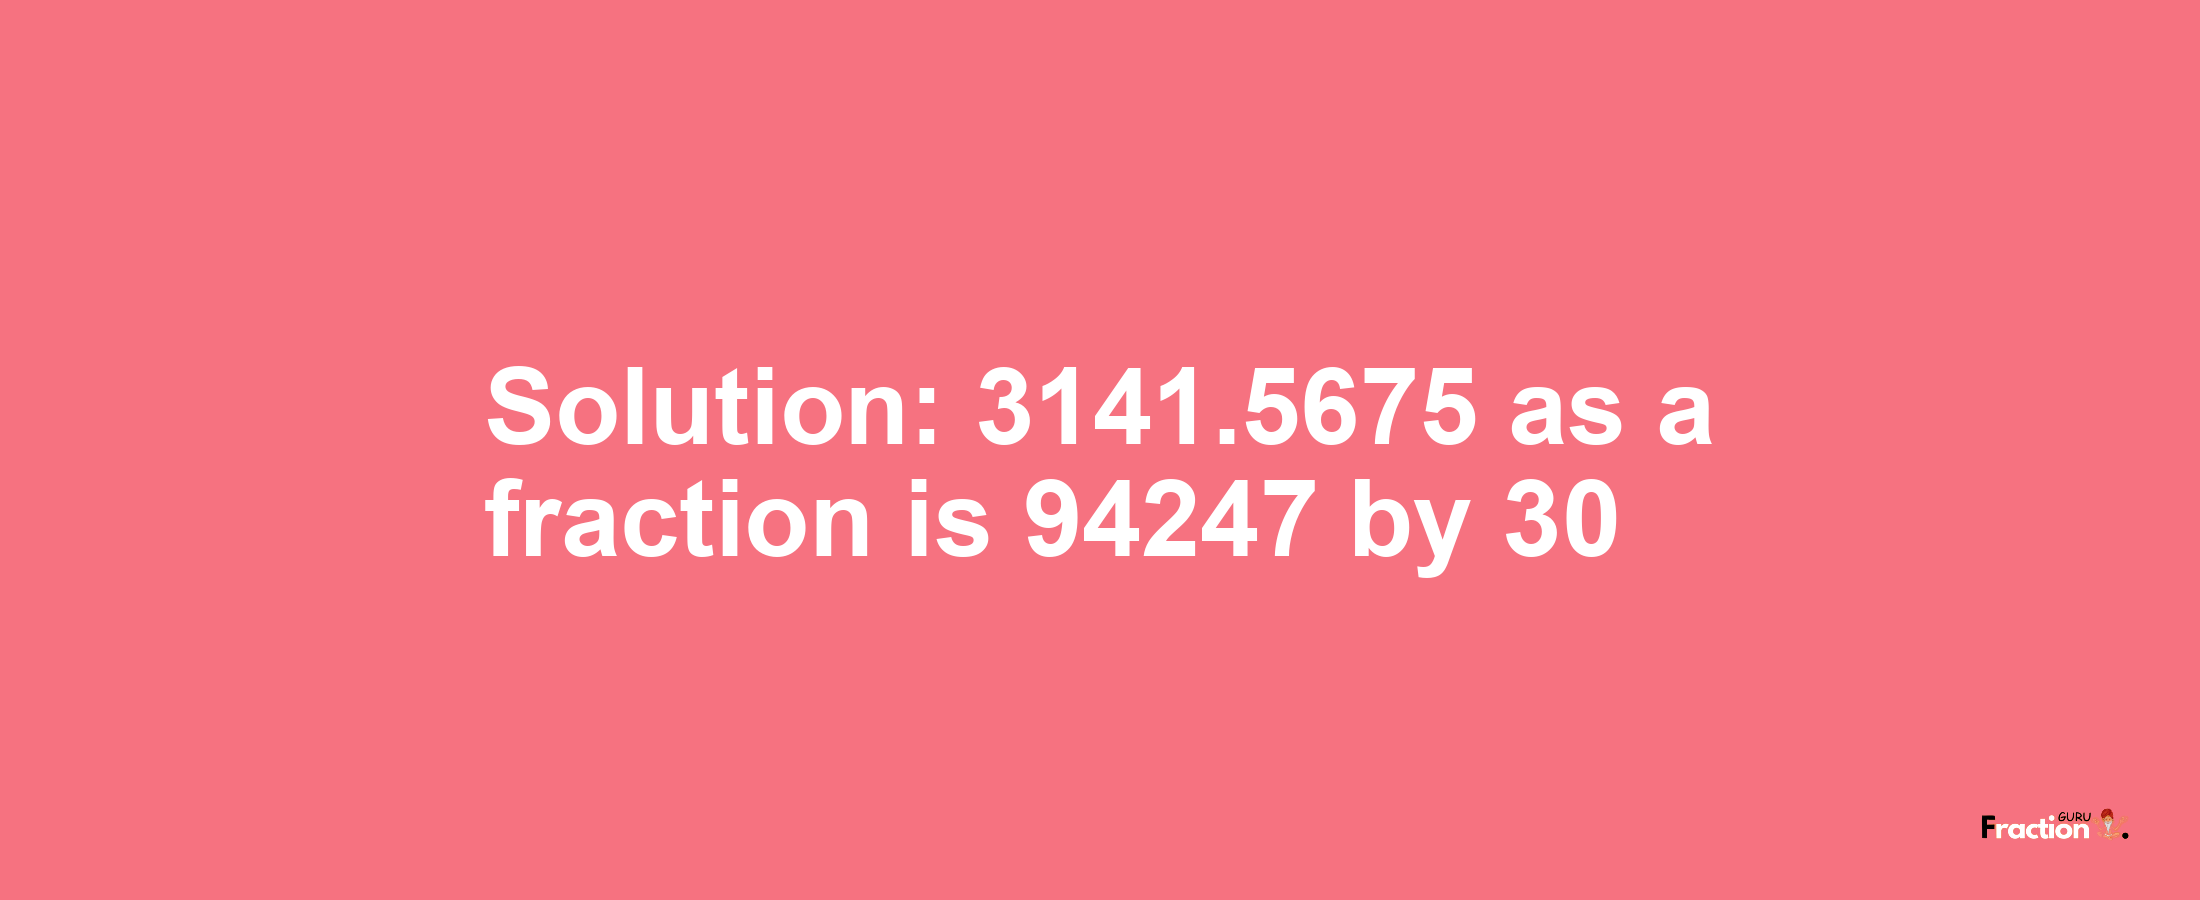 Solution:3141.5675 as a fraction is 94247/30